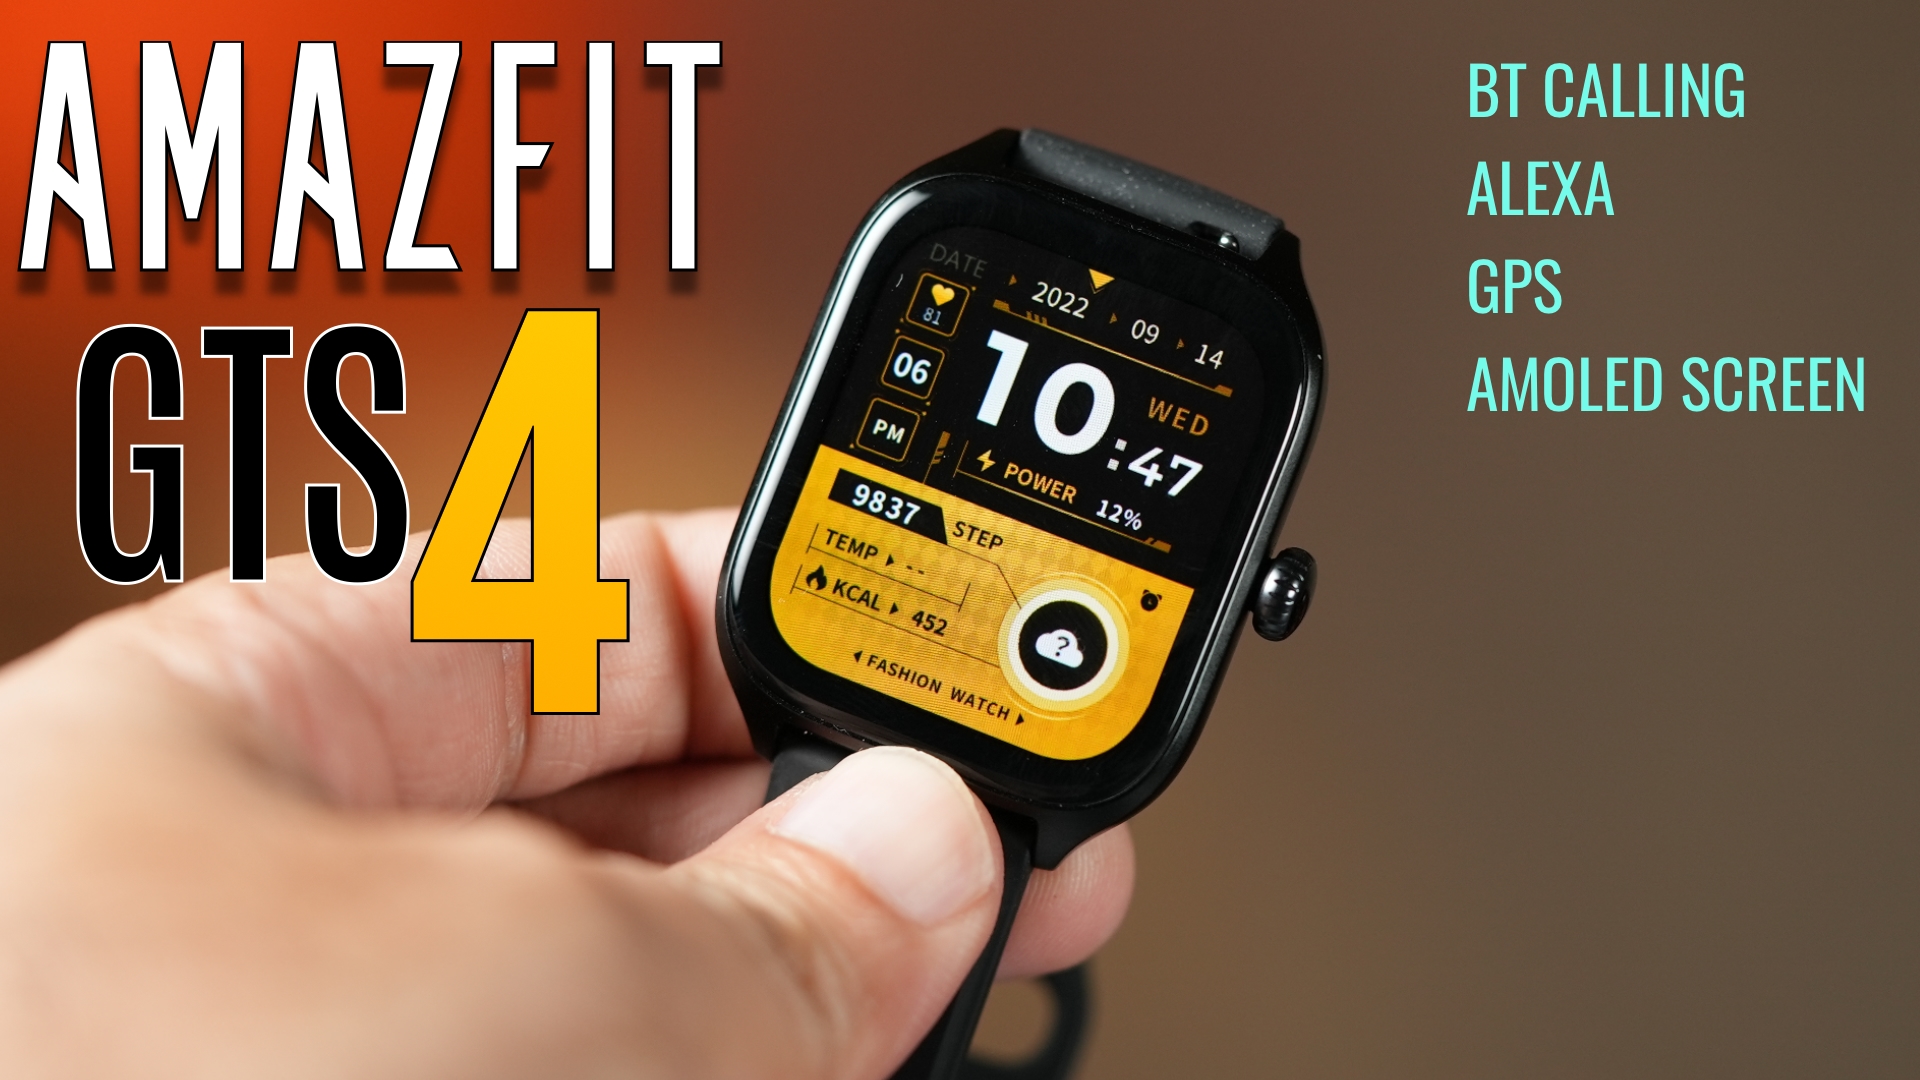 Amazfit GTS 4 the fully loaded smartwatch